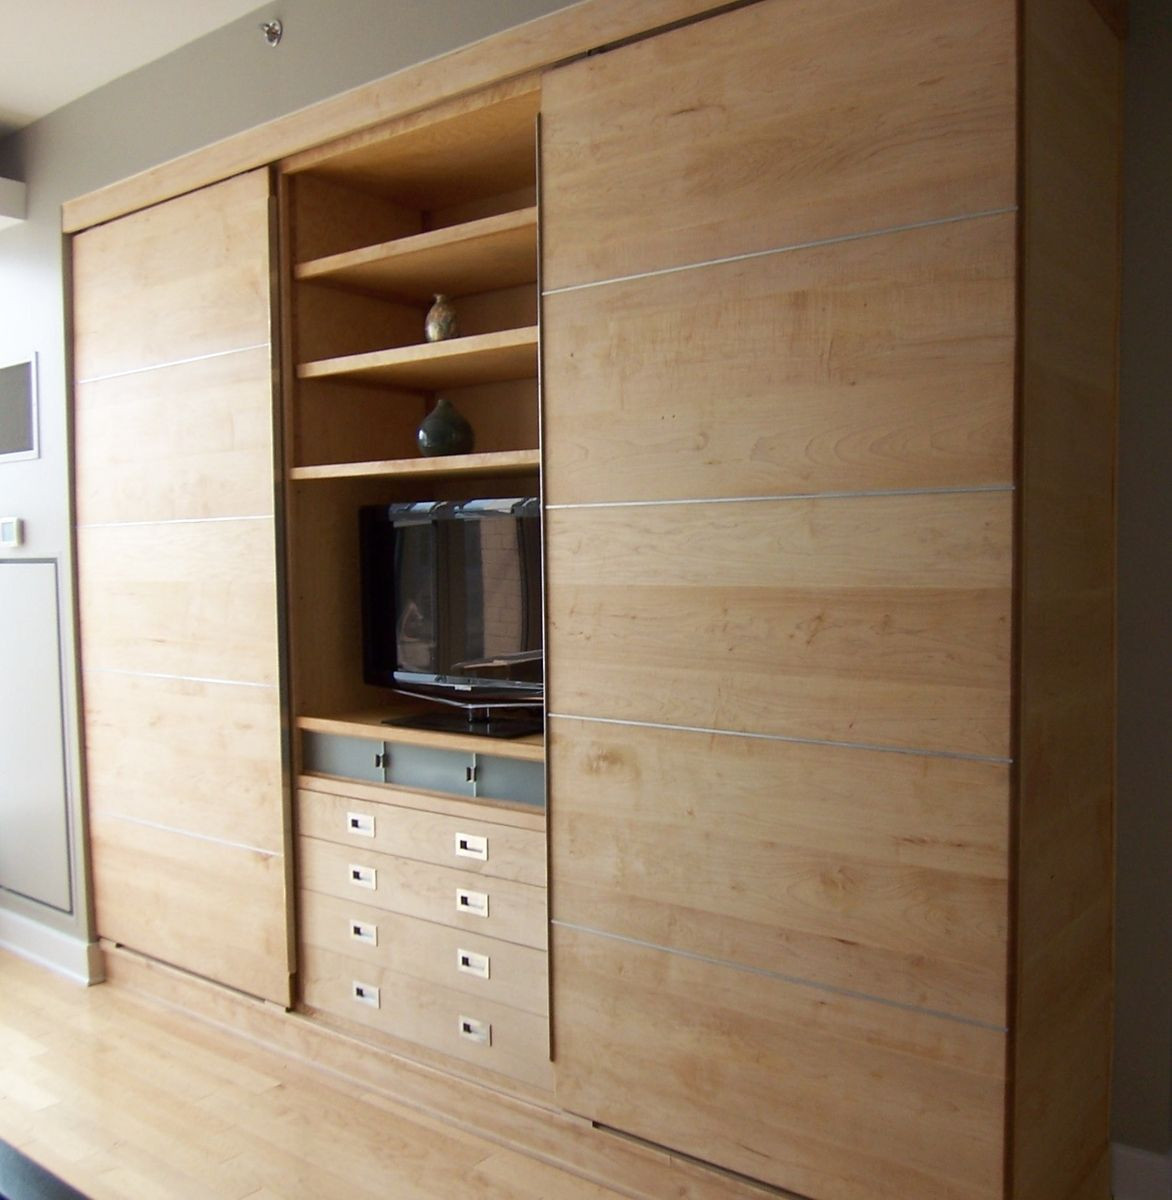 Bedroom Wall Storage Cabinets
 Modern Wall Unit of Maple in 2019